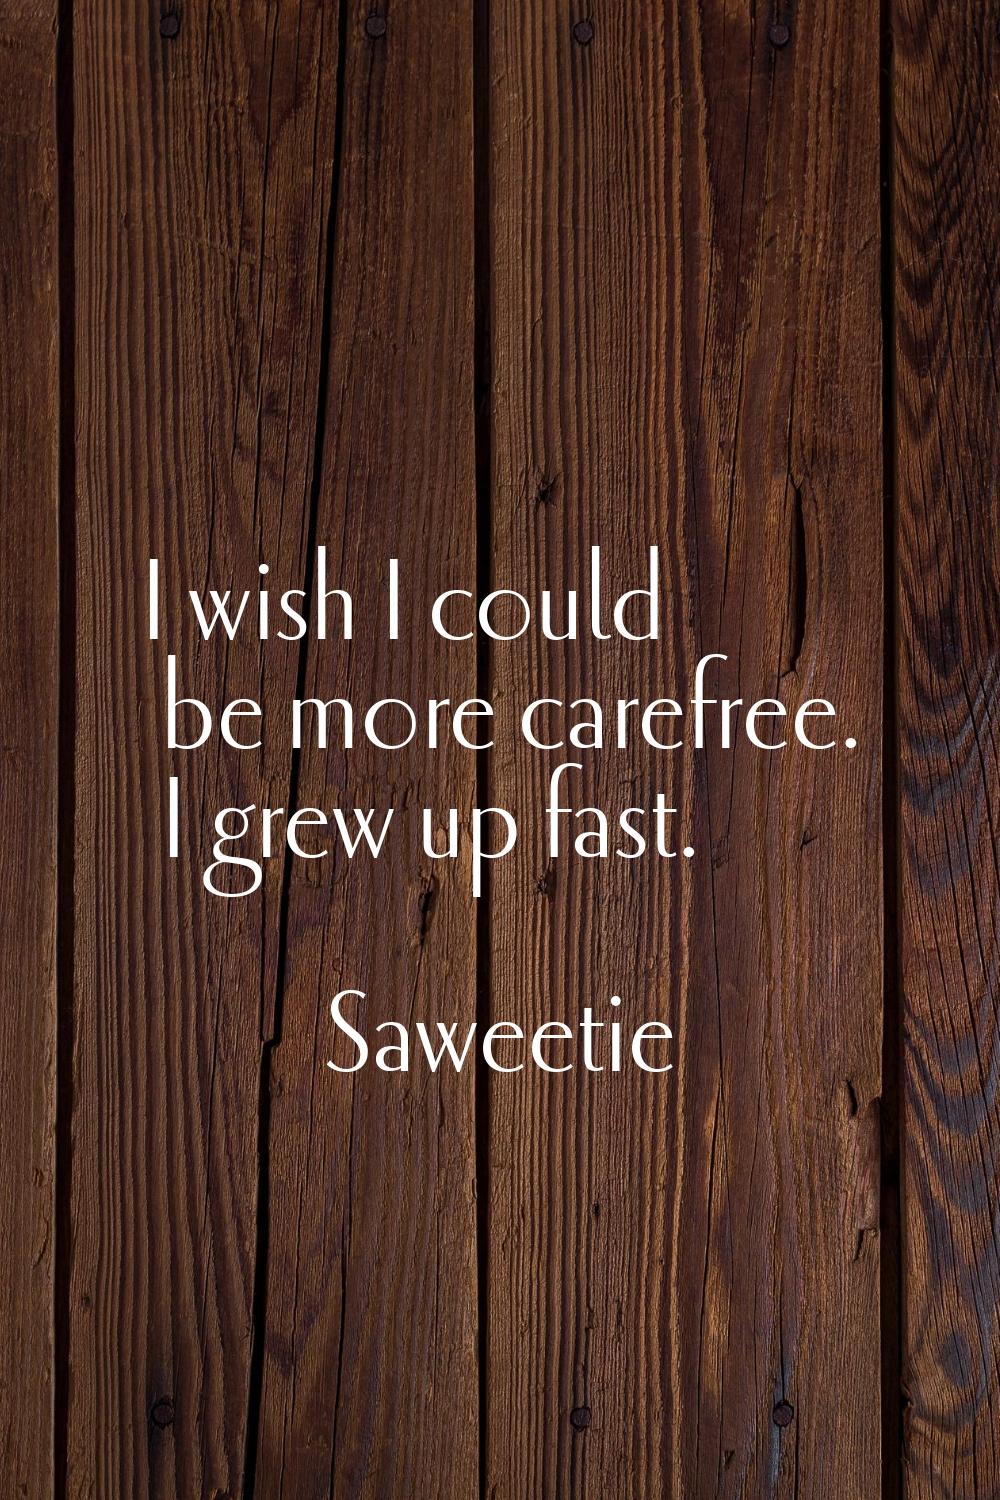 I wish I could be more carefree. I grew up fast.